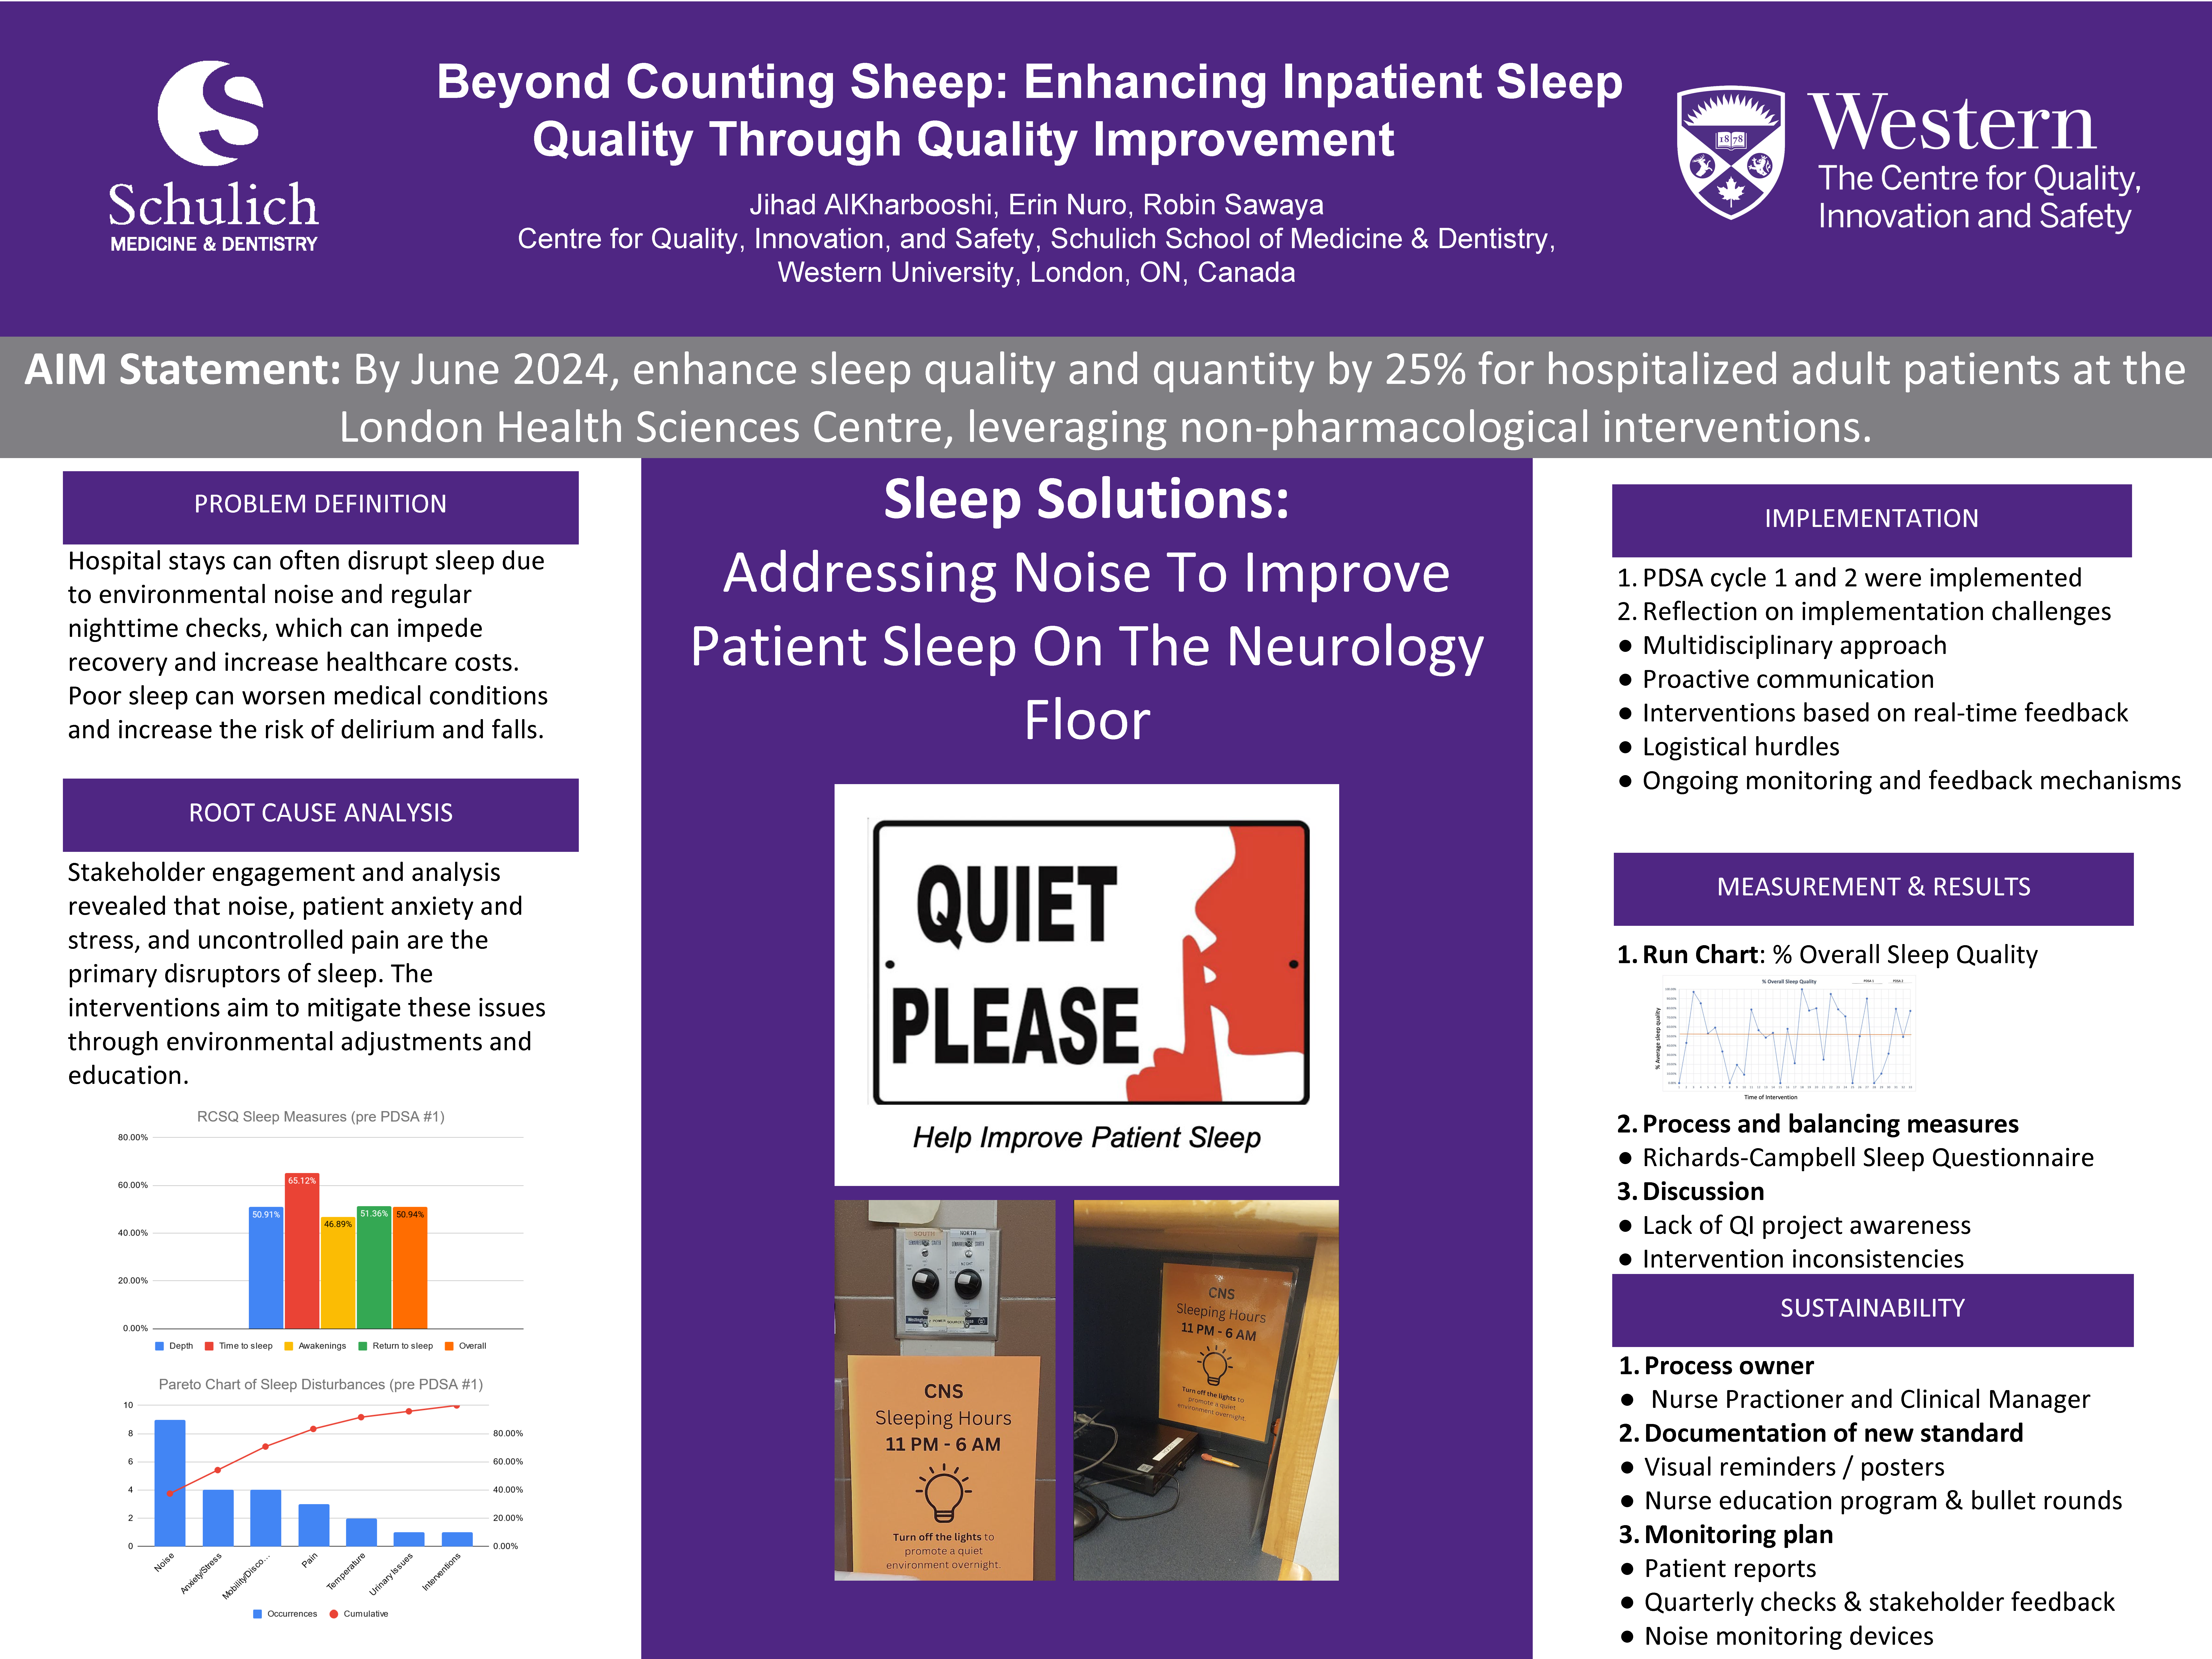 BISQ_2023-2024_Beyond_Counting_Sheep:_Enhancing_Inpatient_Sleep_Quality_Through_Quality_Improvement_poster.png